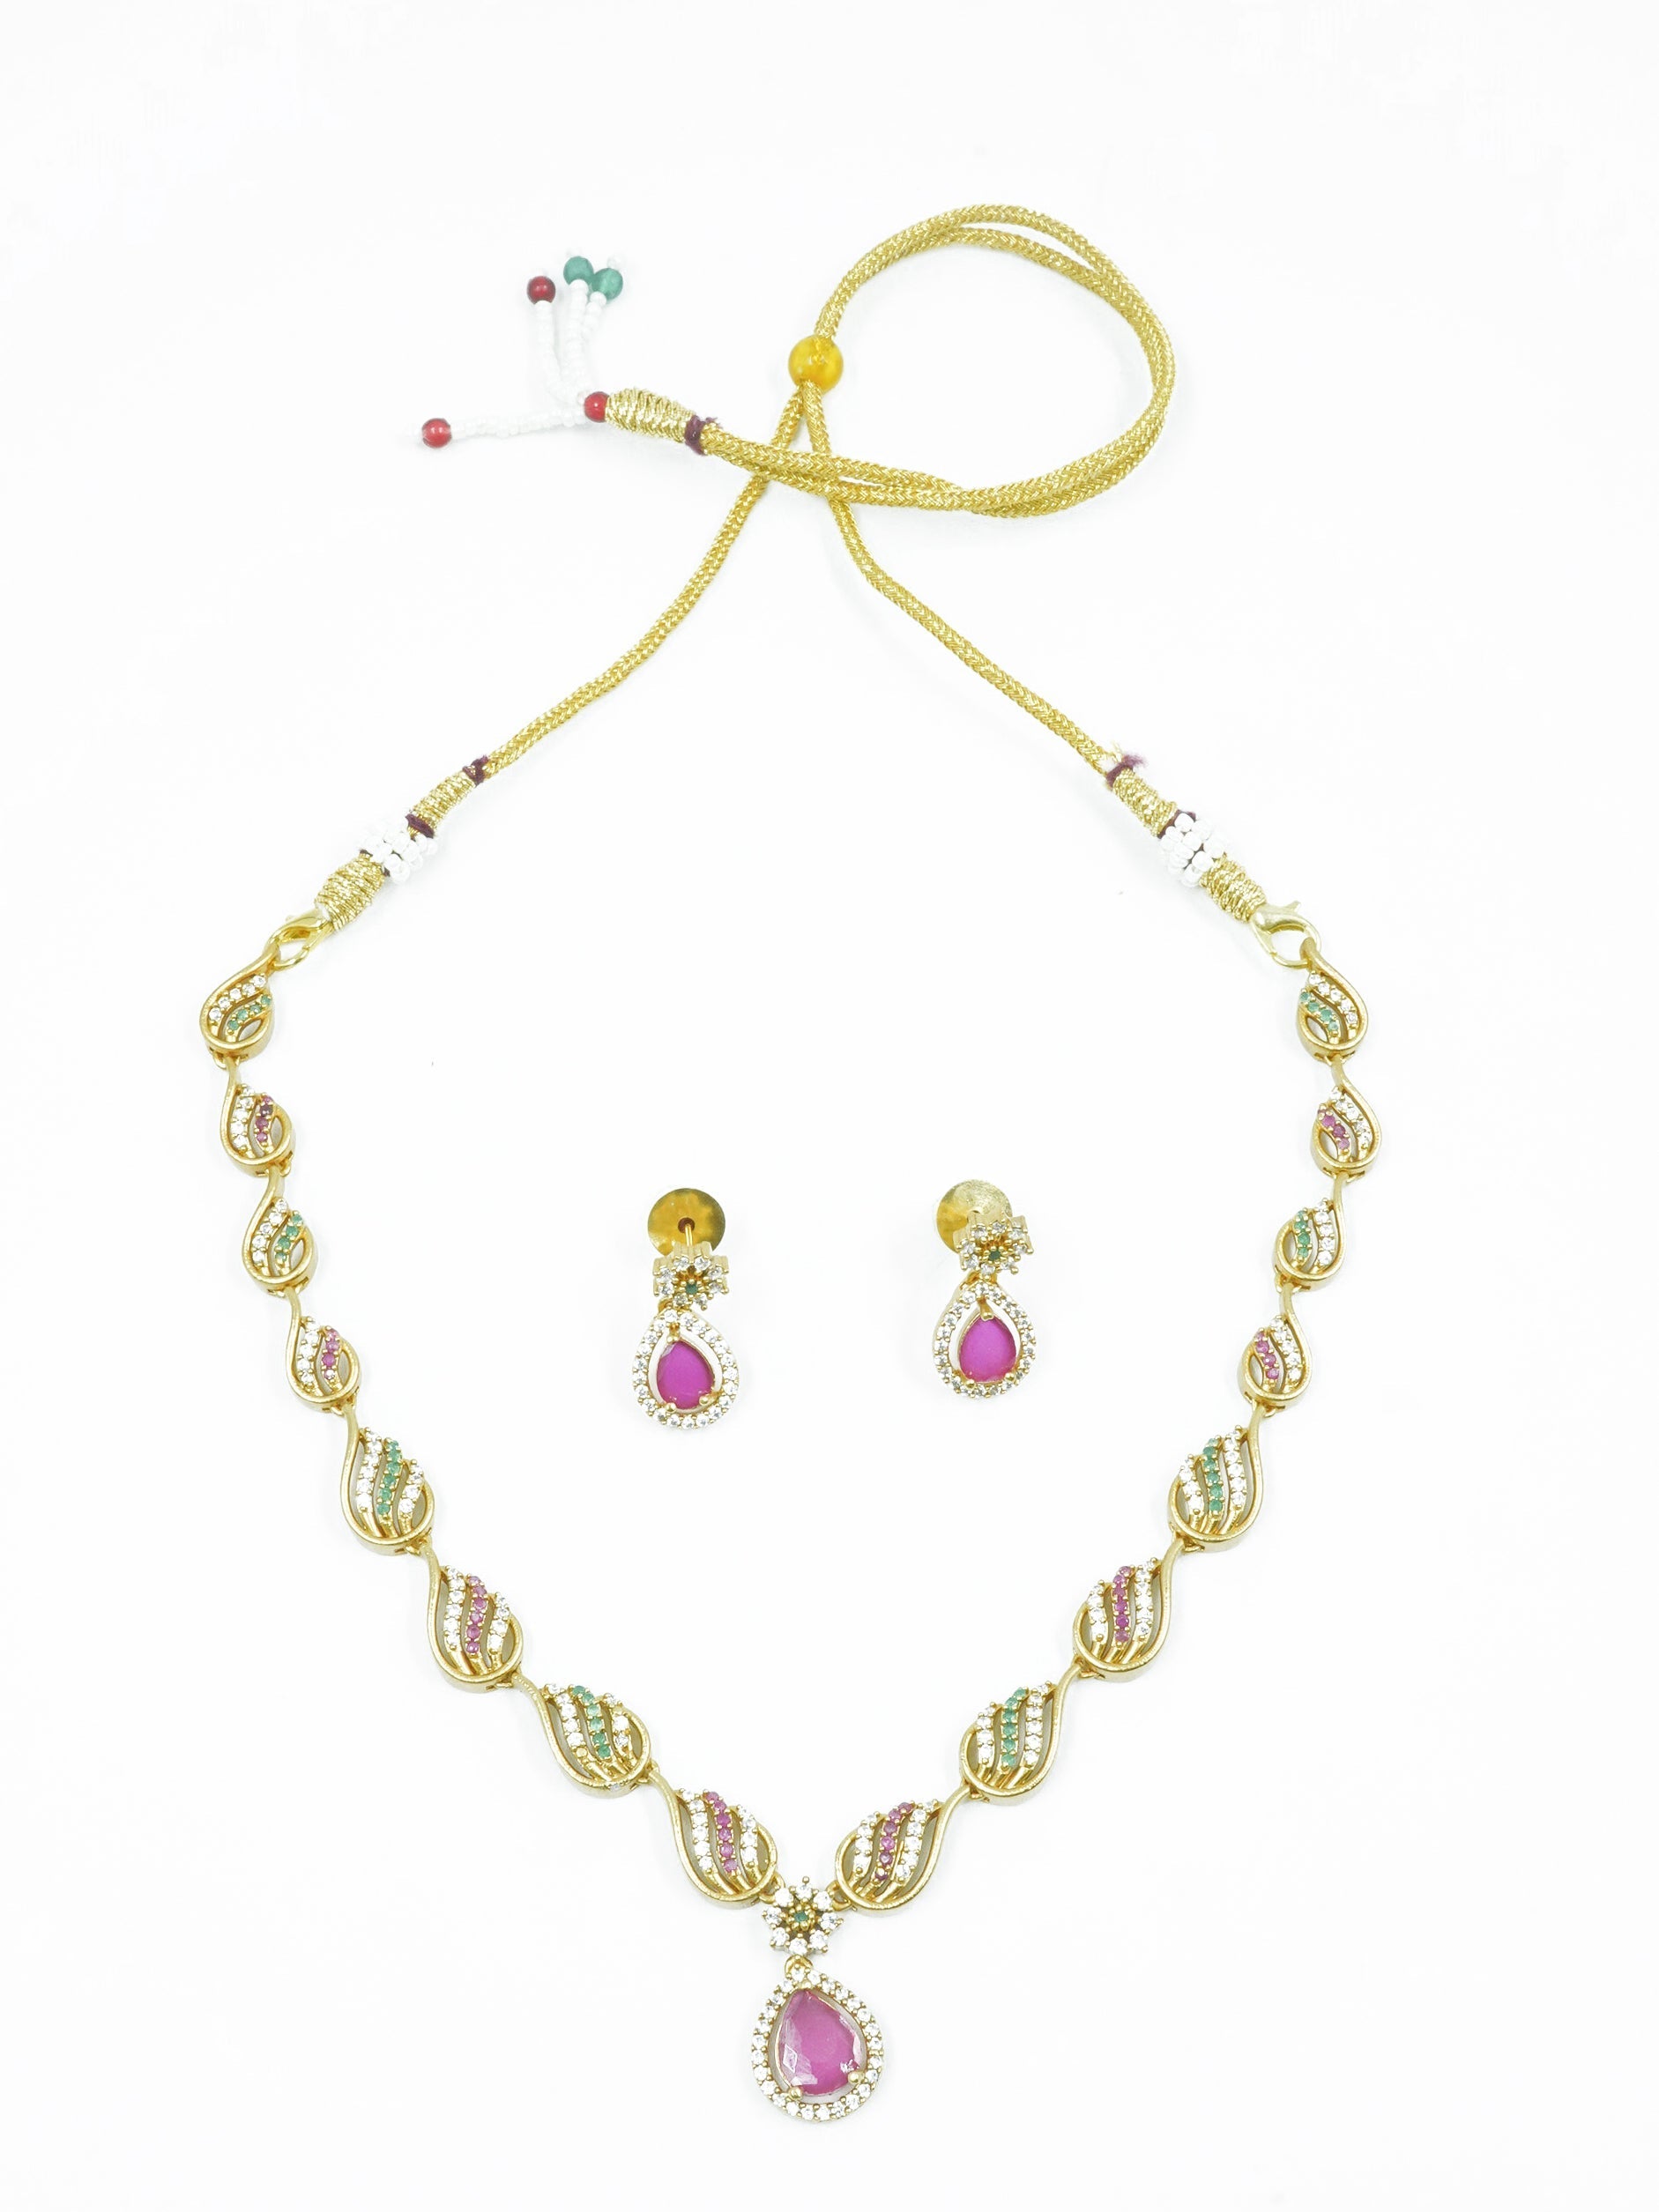 Premium Gold Finish Sayara Collection Necklace with CZ Stones in diff colours 12804N